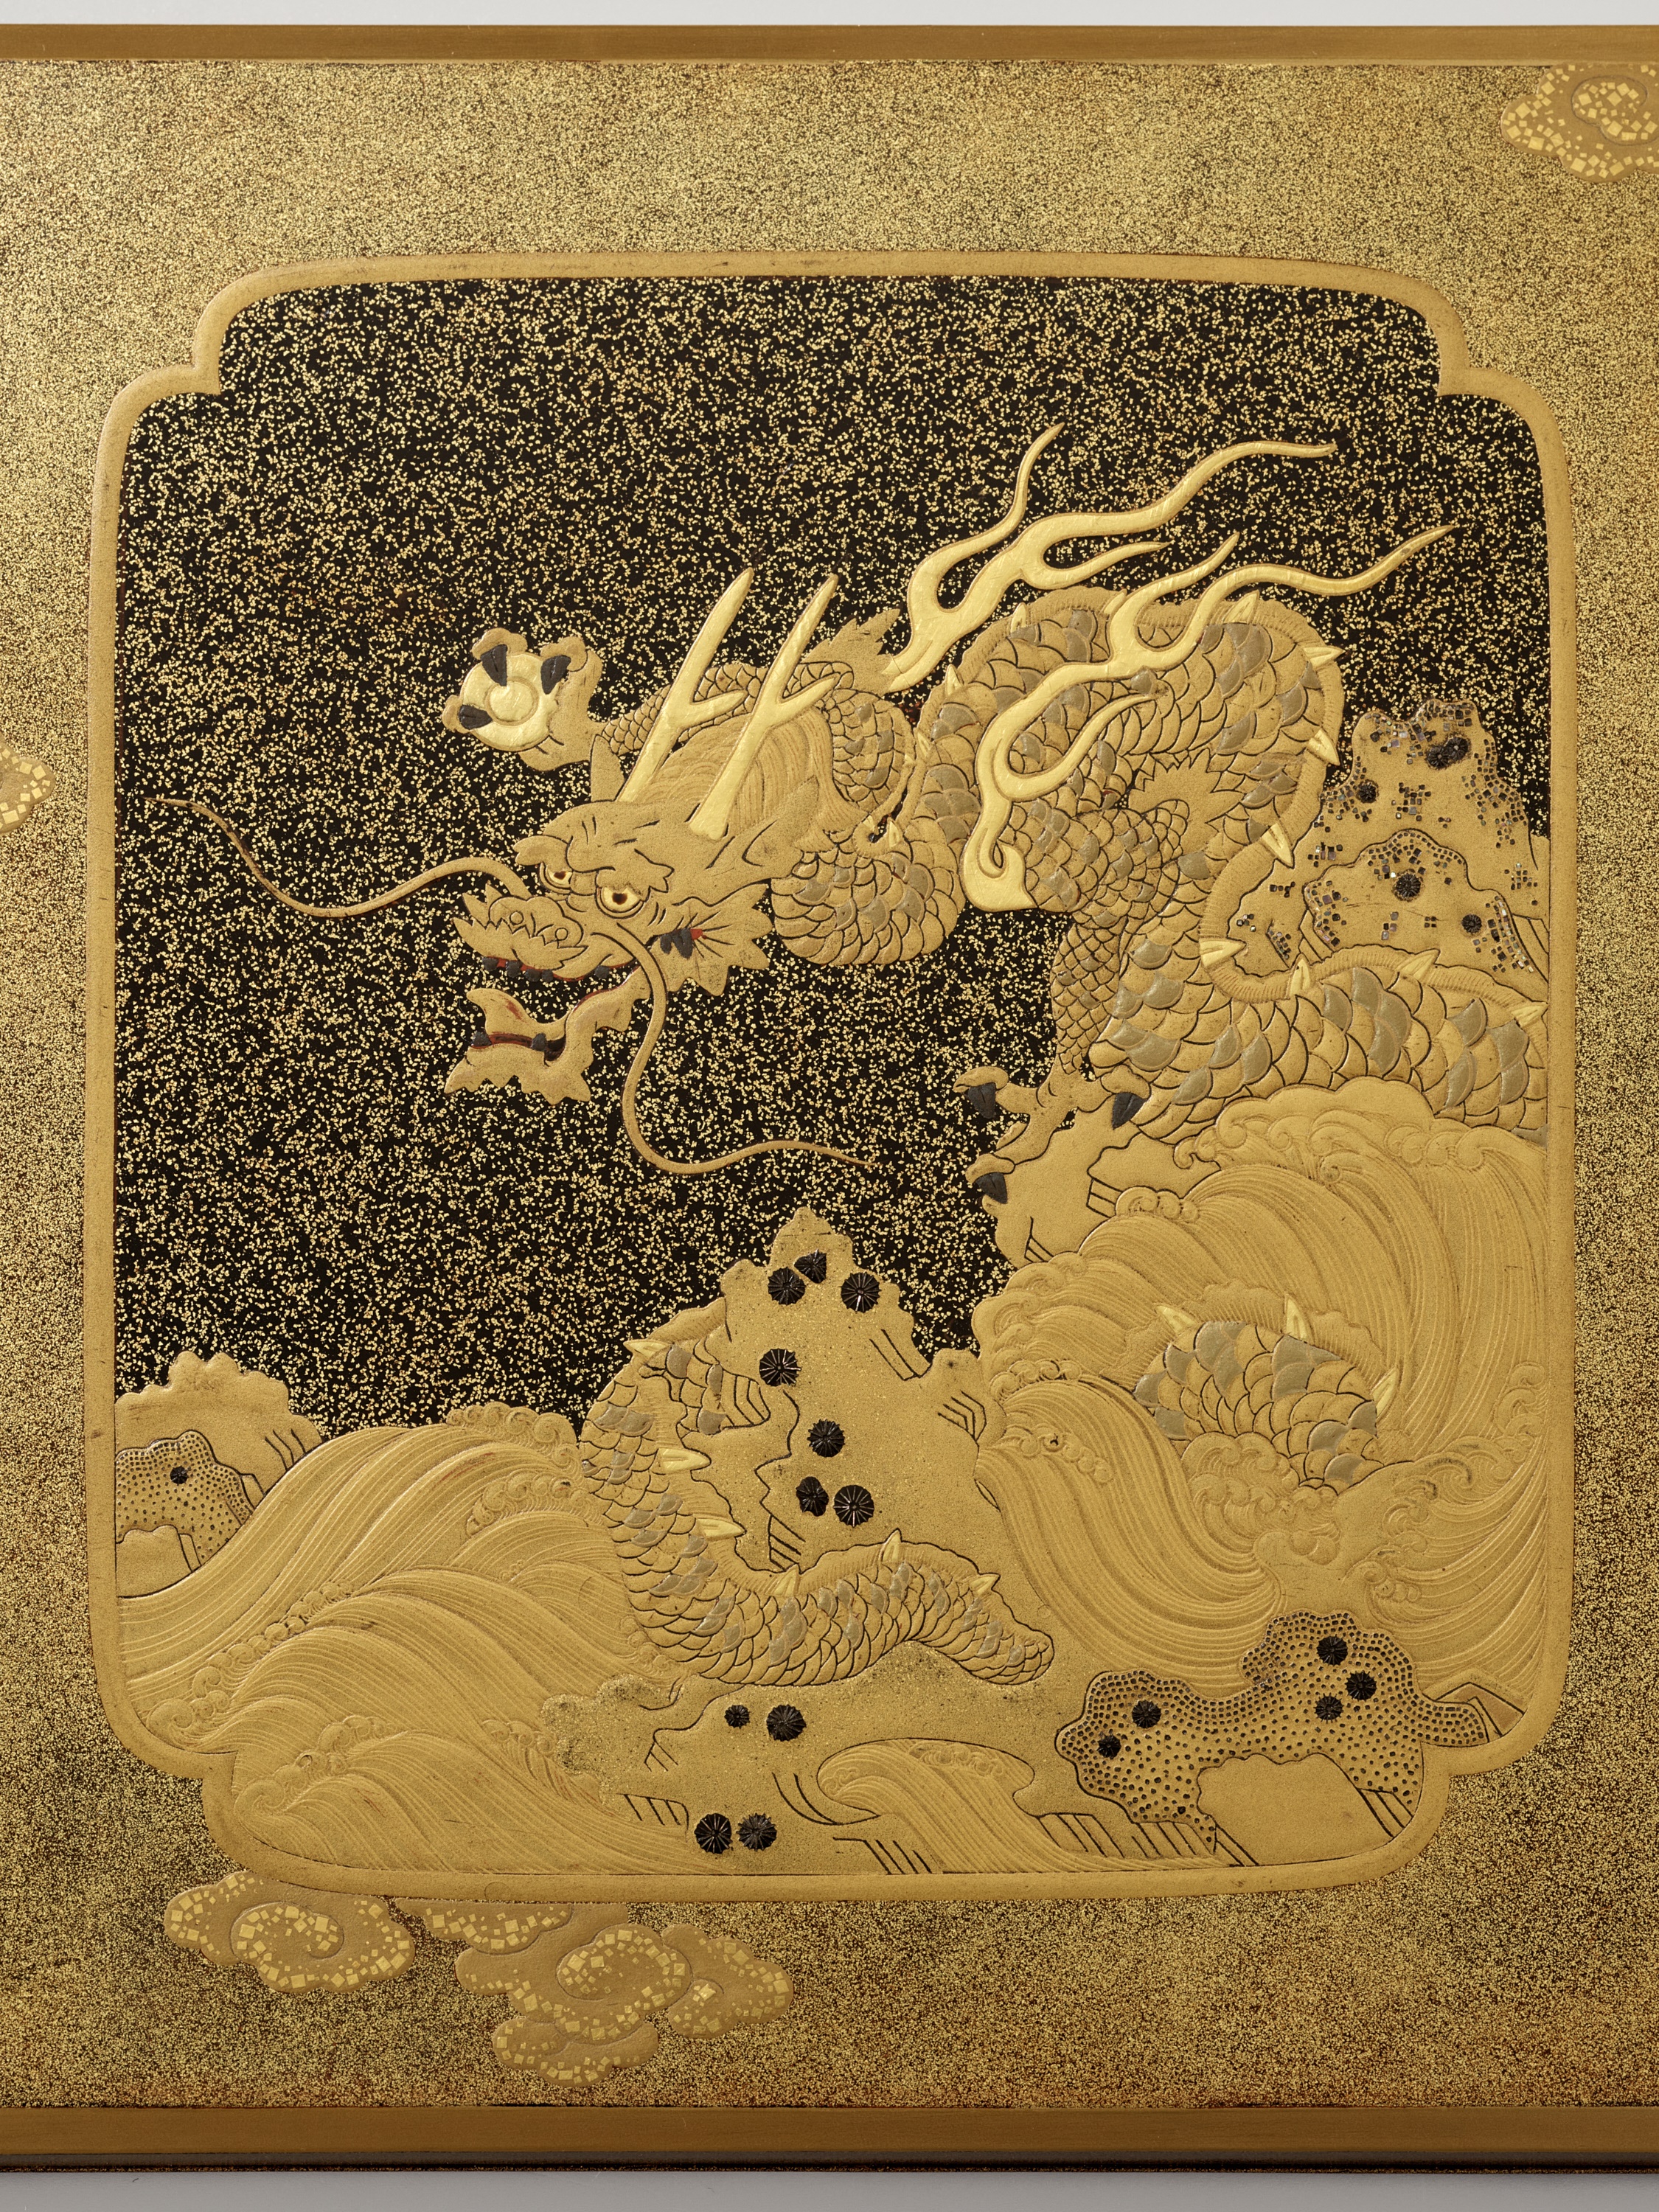 A FINE AND RARE GOLD LACQUER SUZURIBAKO DEPICTING A DRAGON, TIGERS, AND A LEOPARD (FEMALE TIGER) - Image 4 of 12